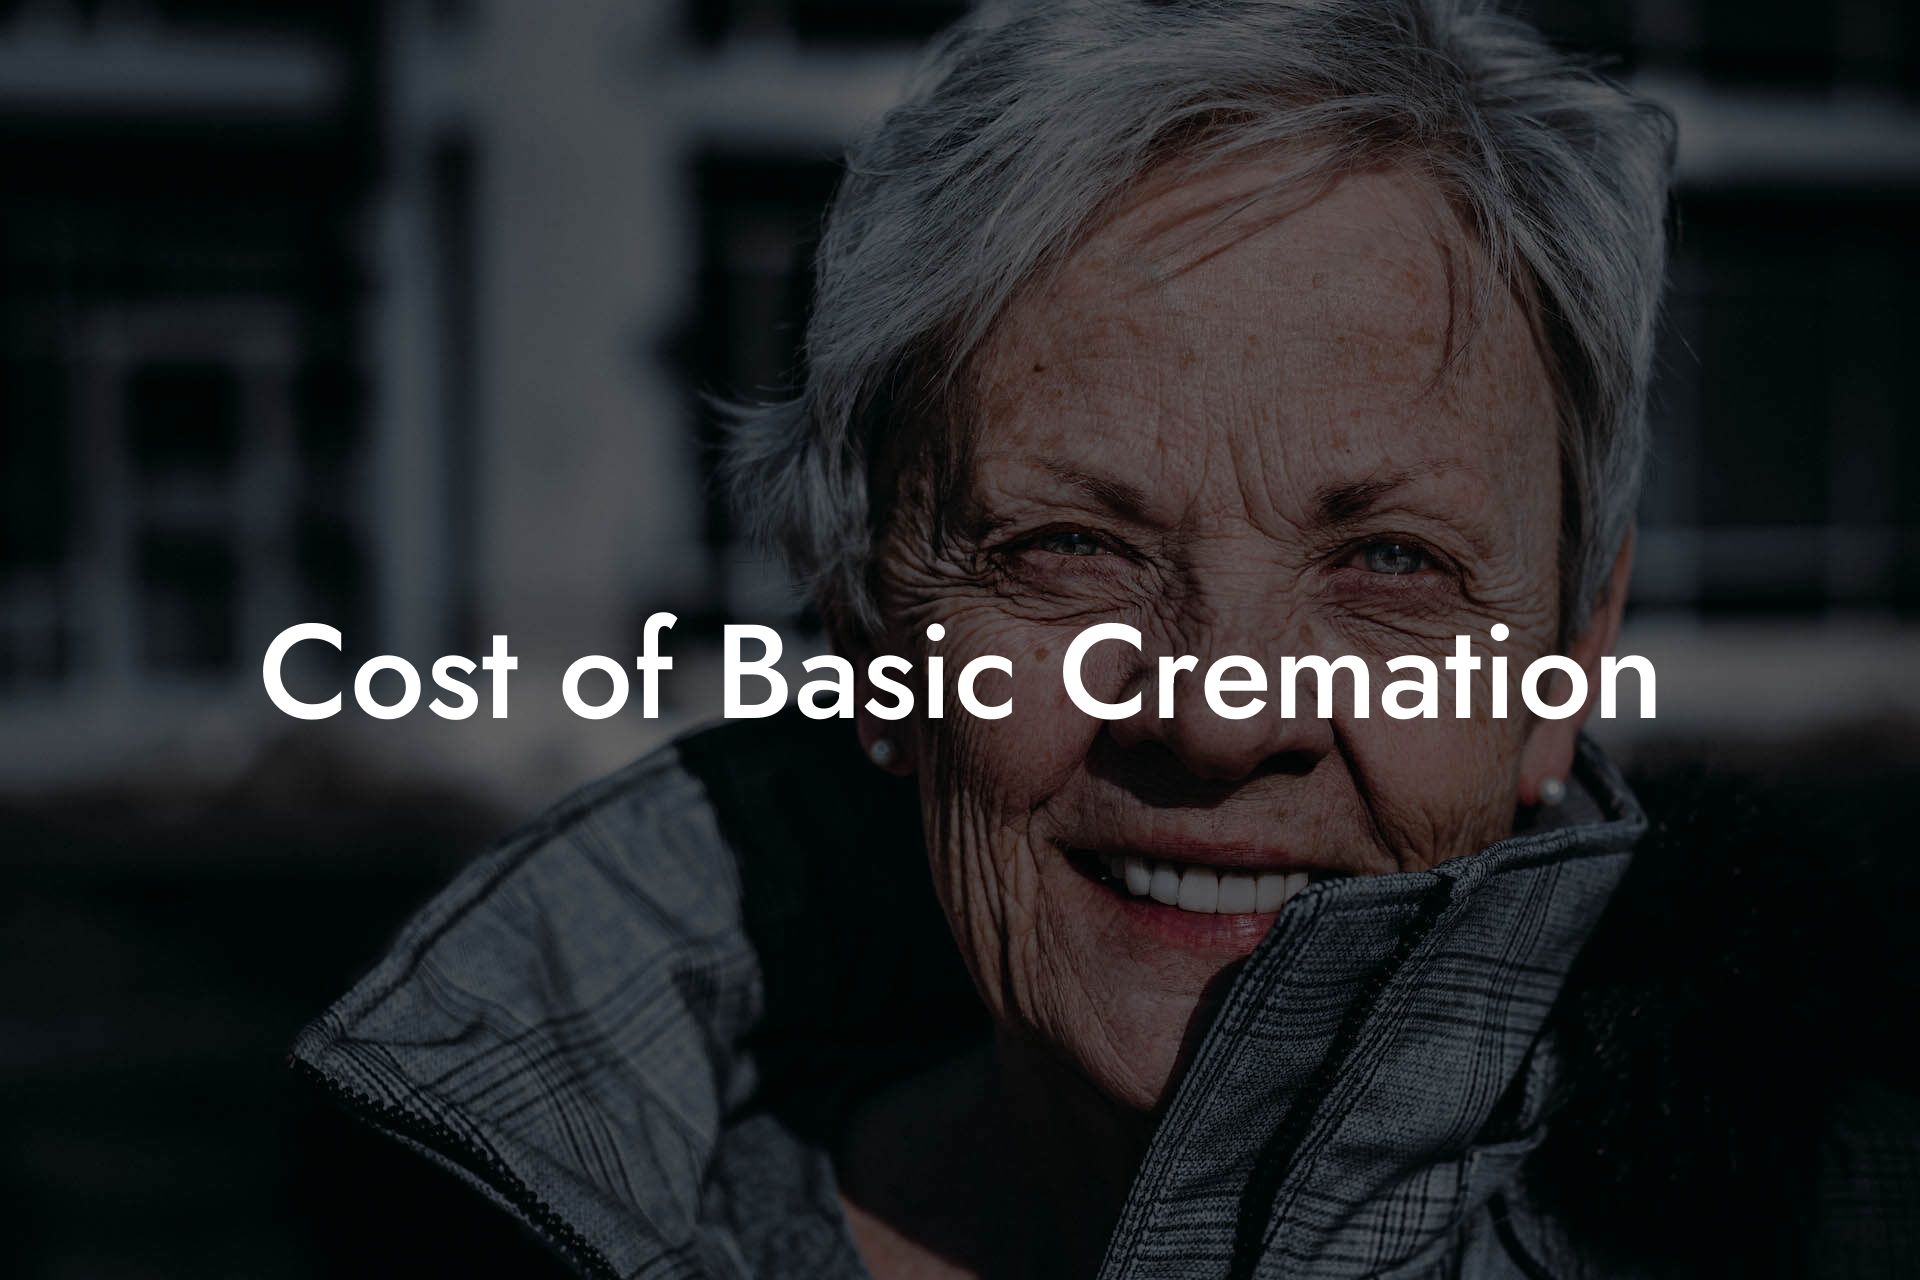 Cost of Basic Cremation